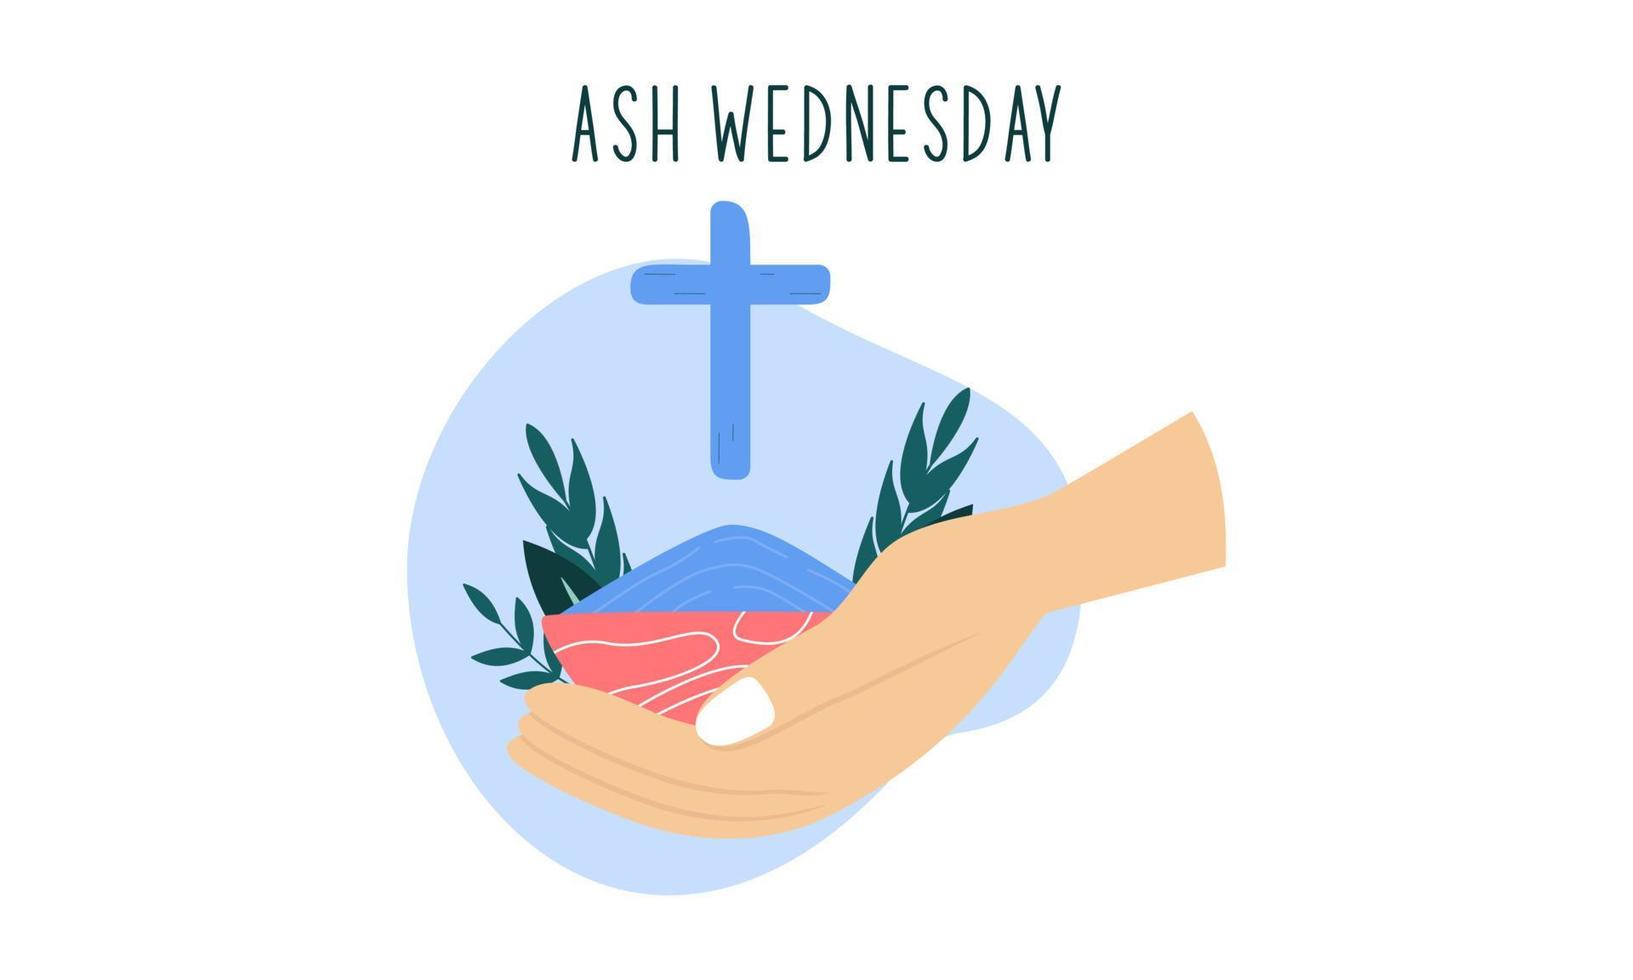 Ash Wednesday is a Christian holy day of prayer and fasting vector